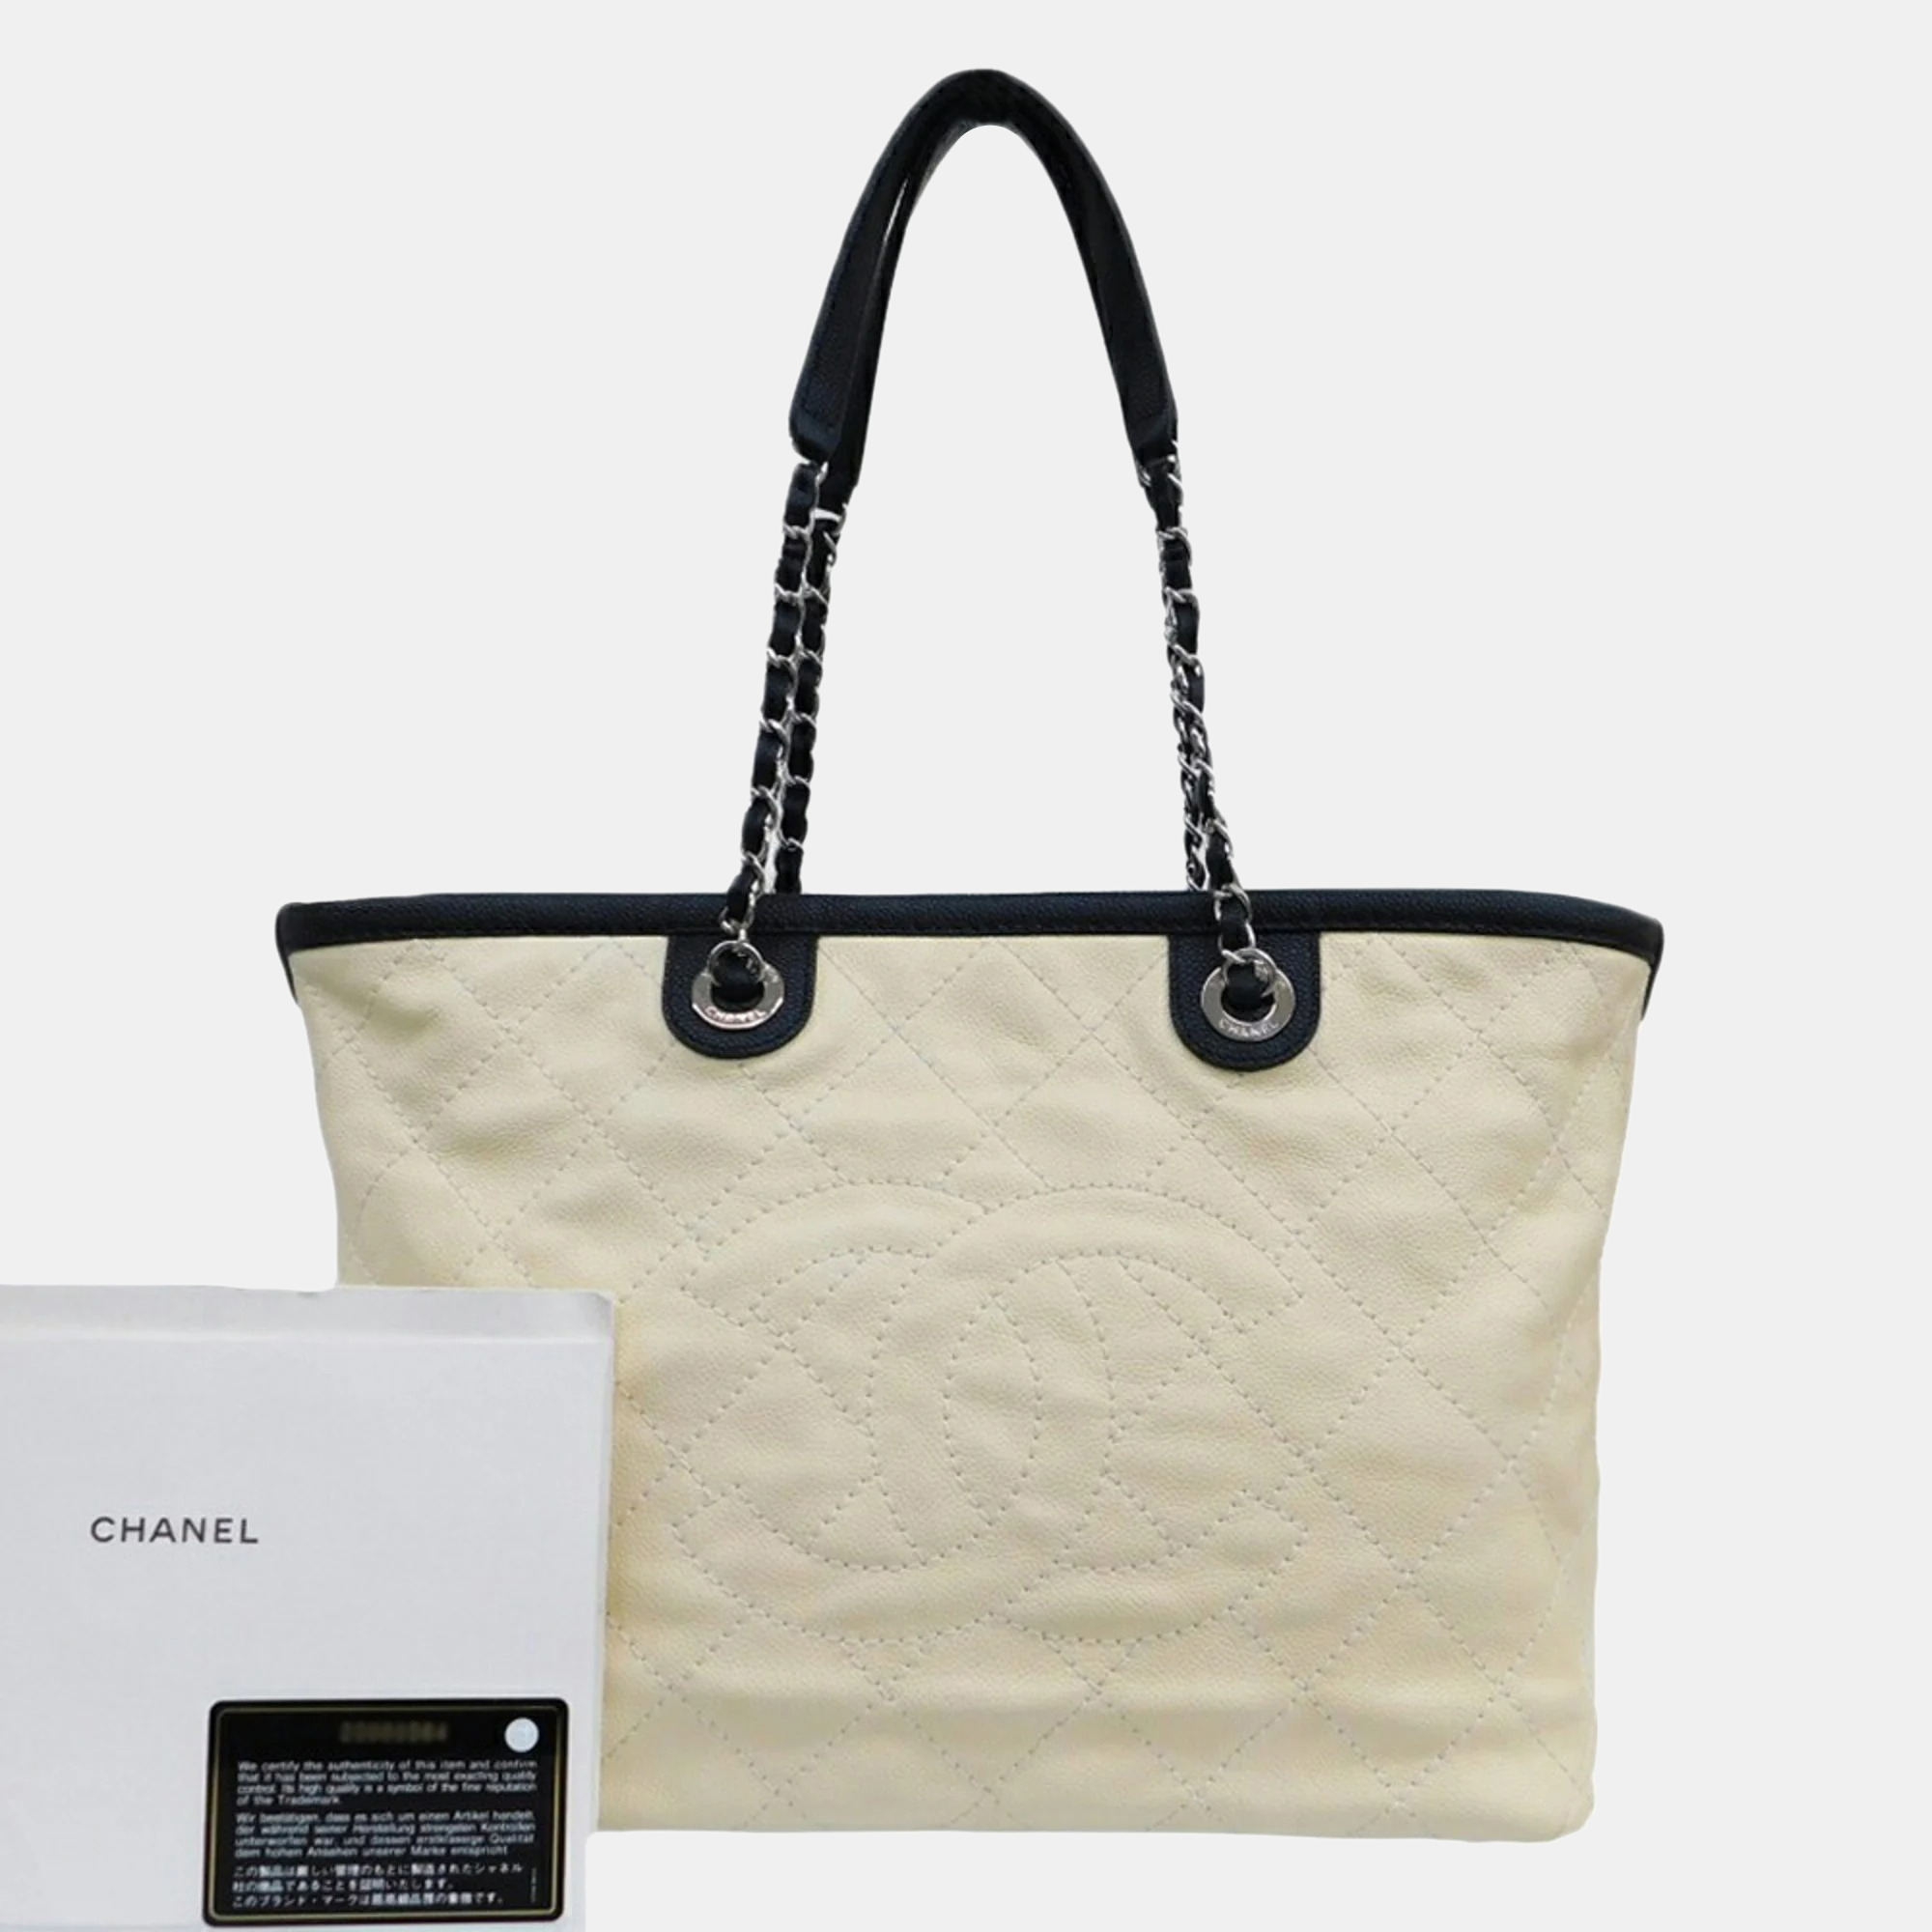 Chanel white/black quilted small cc tote